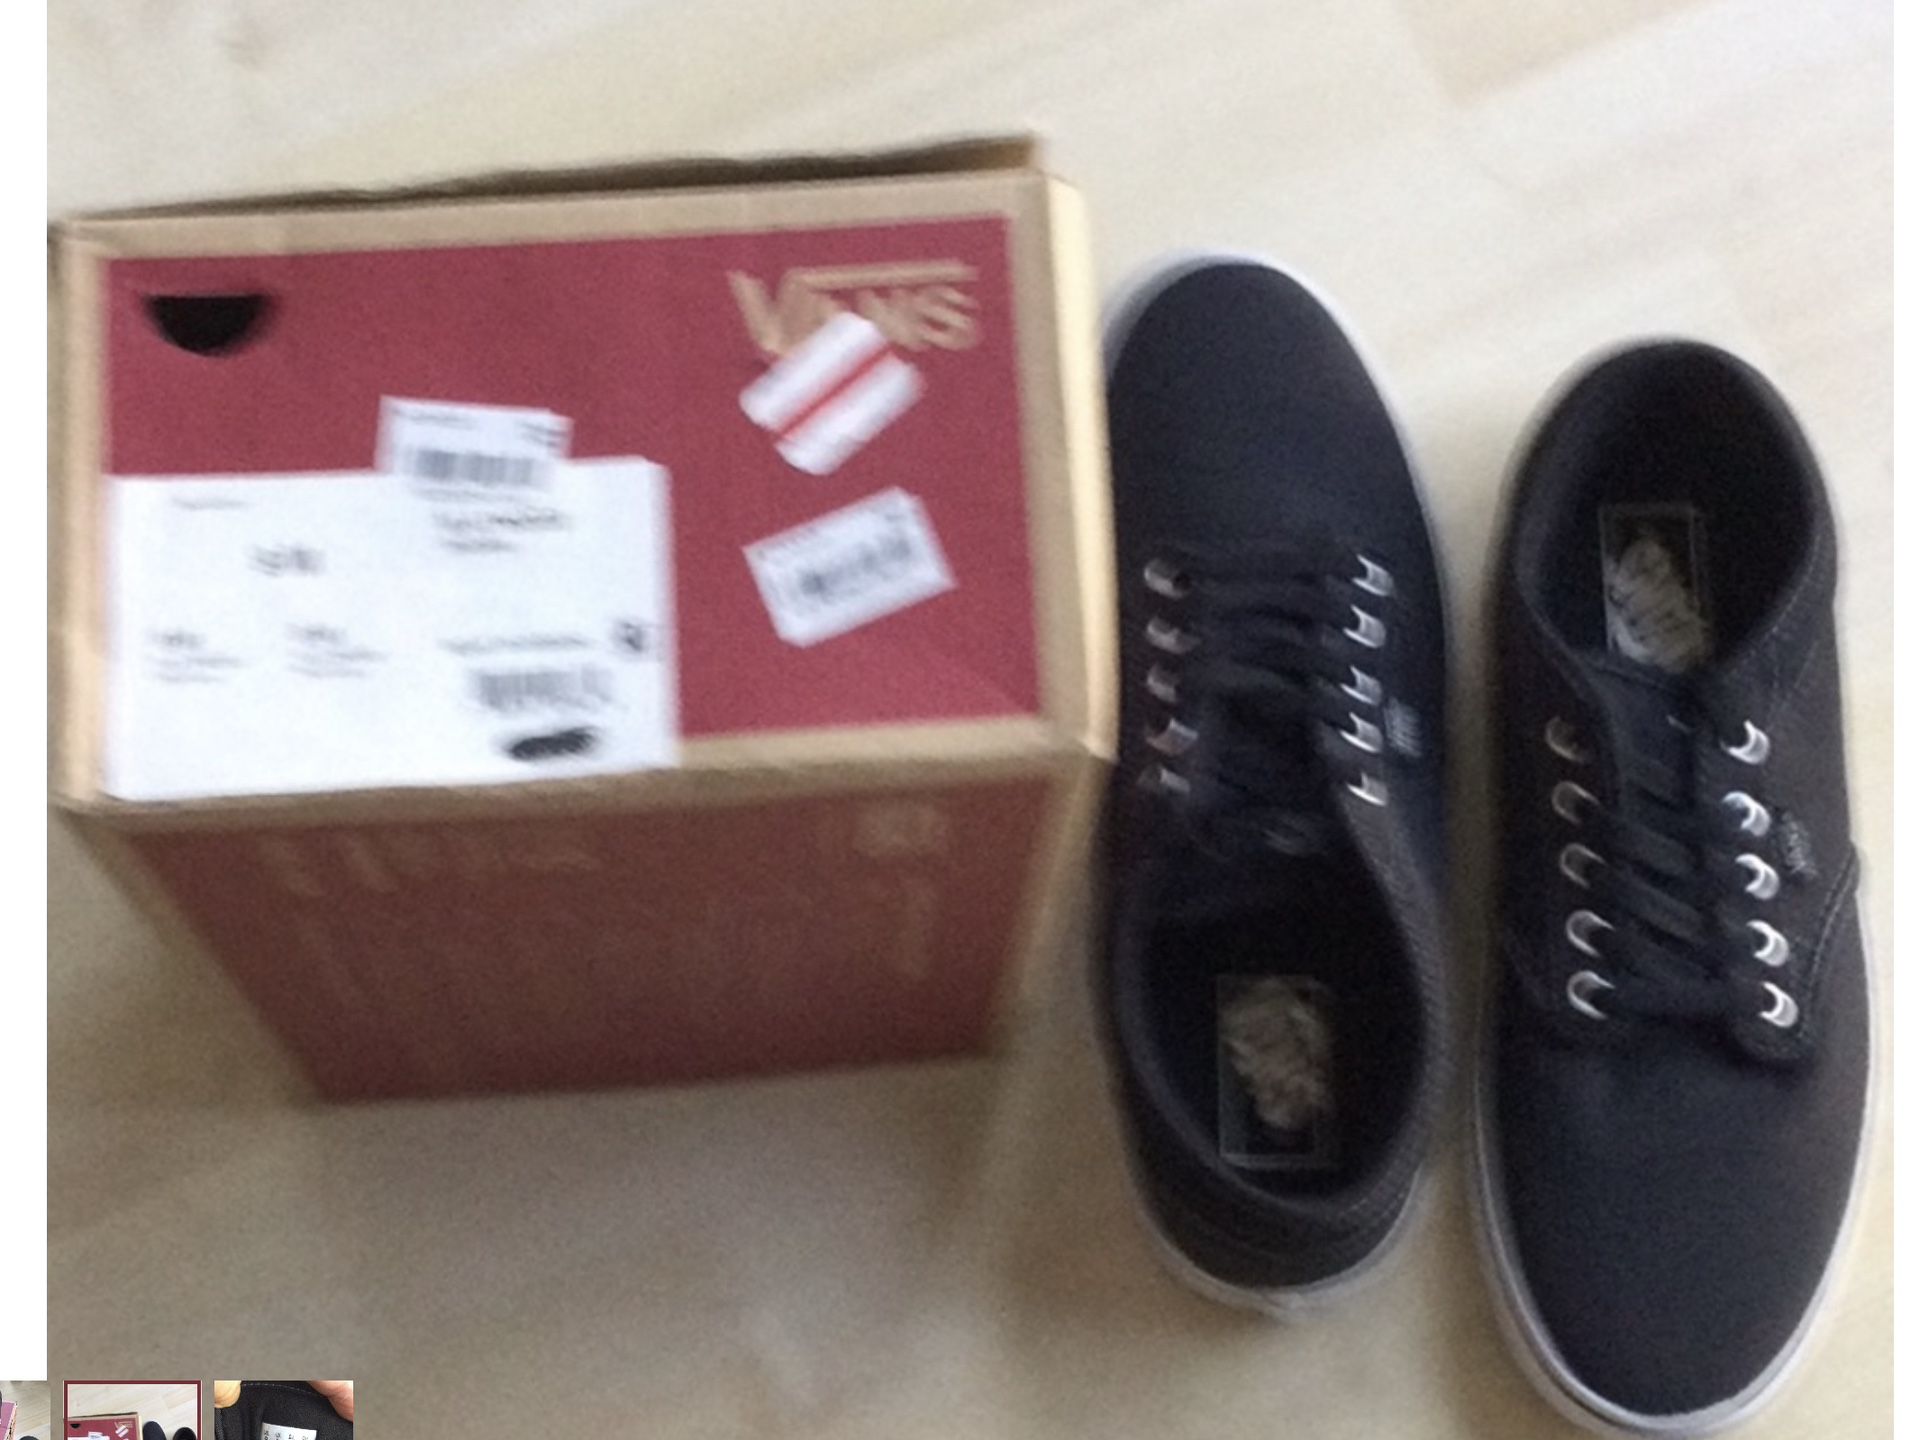 New Vans M Atwood Shoes Size 9 Black